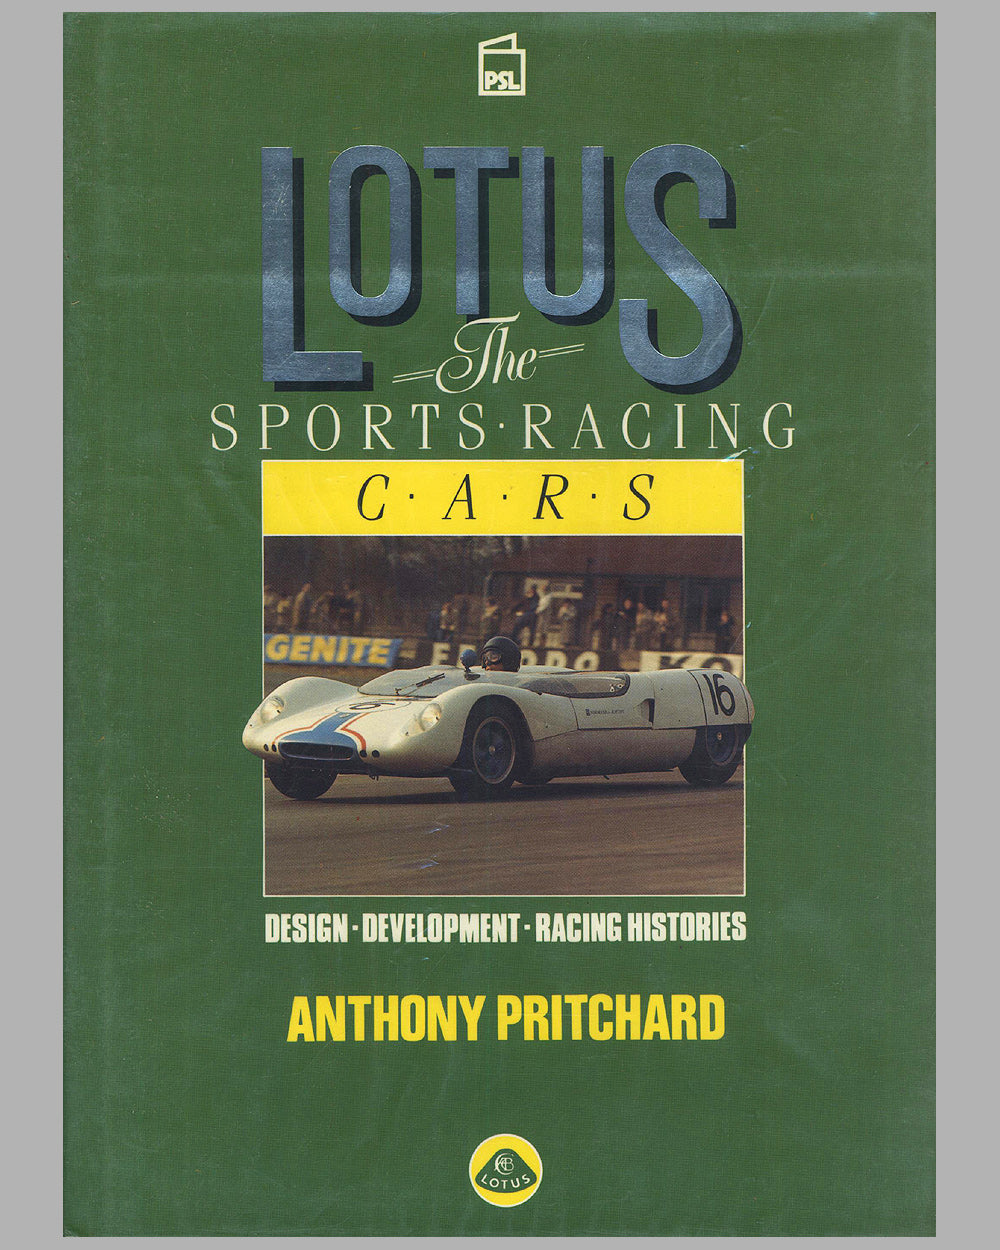 Lotus – The Sports Racing Cars book by Anthony Pritchard, 1st ed., 1987